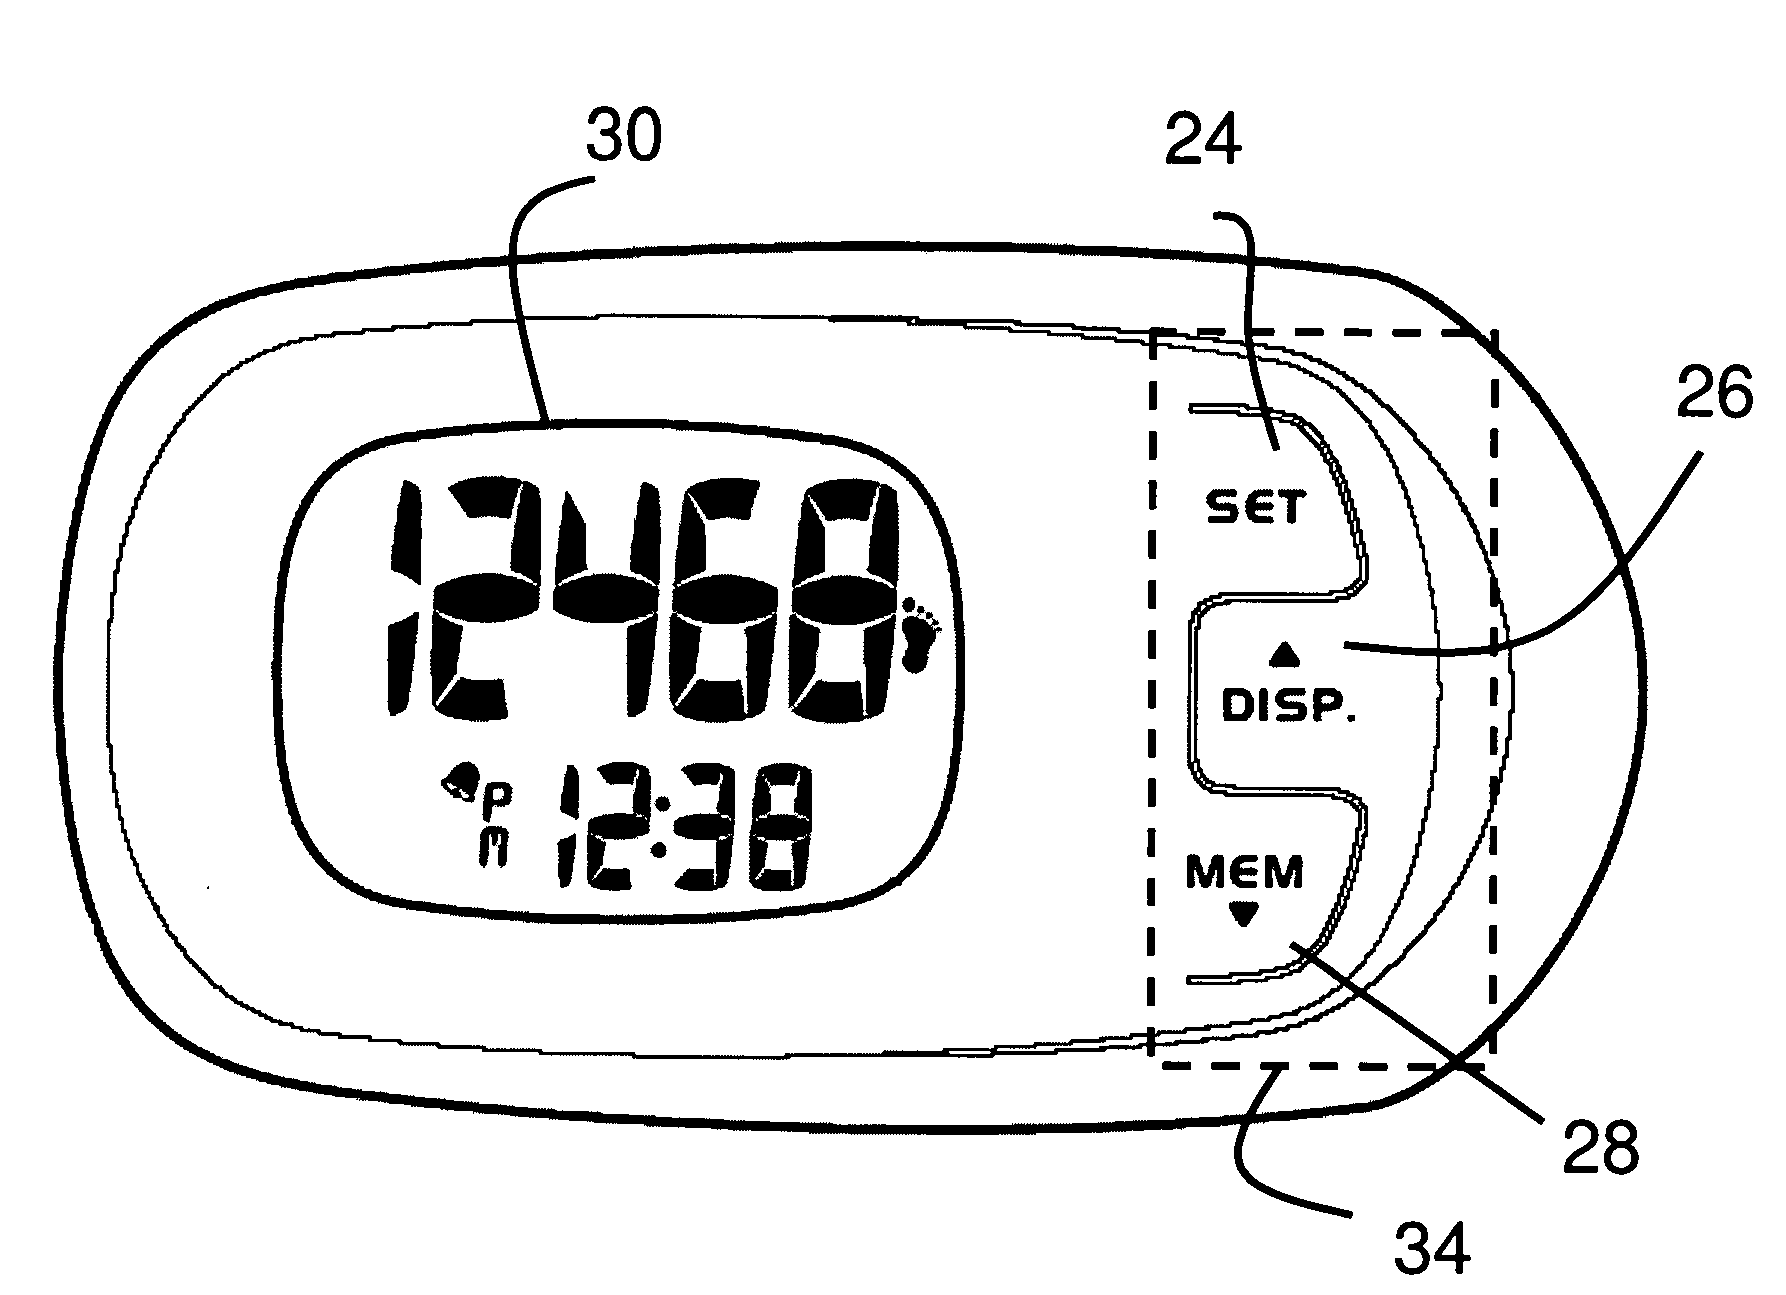 Apparatus and Method for Counting Exercise Repetitions